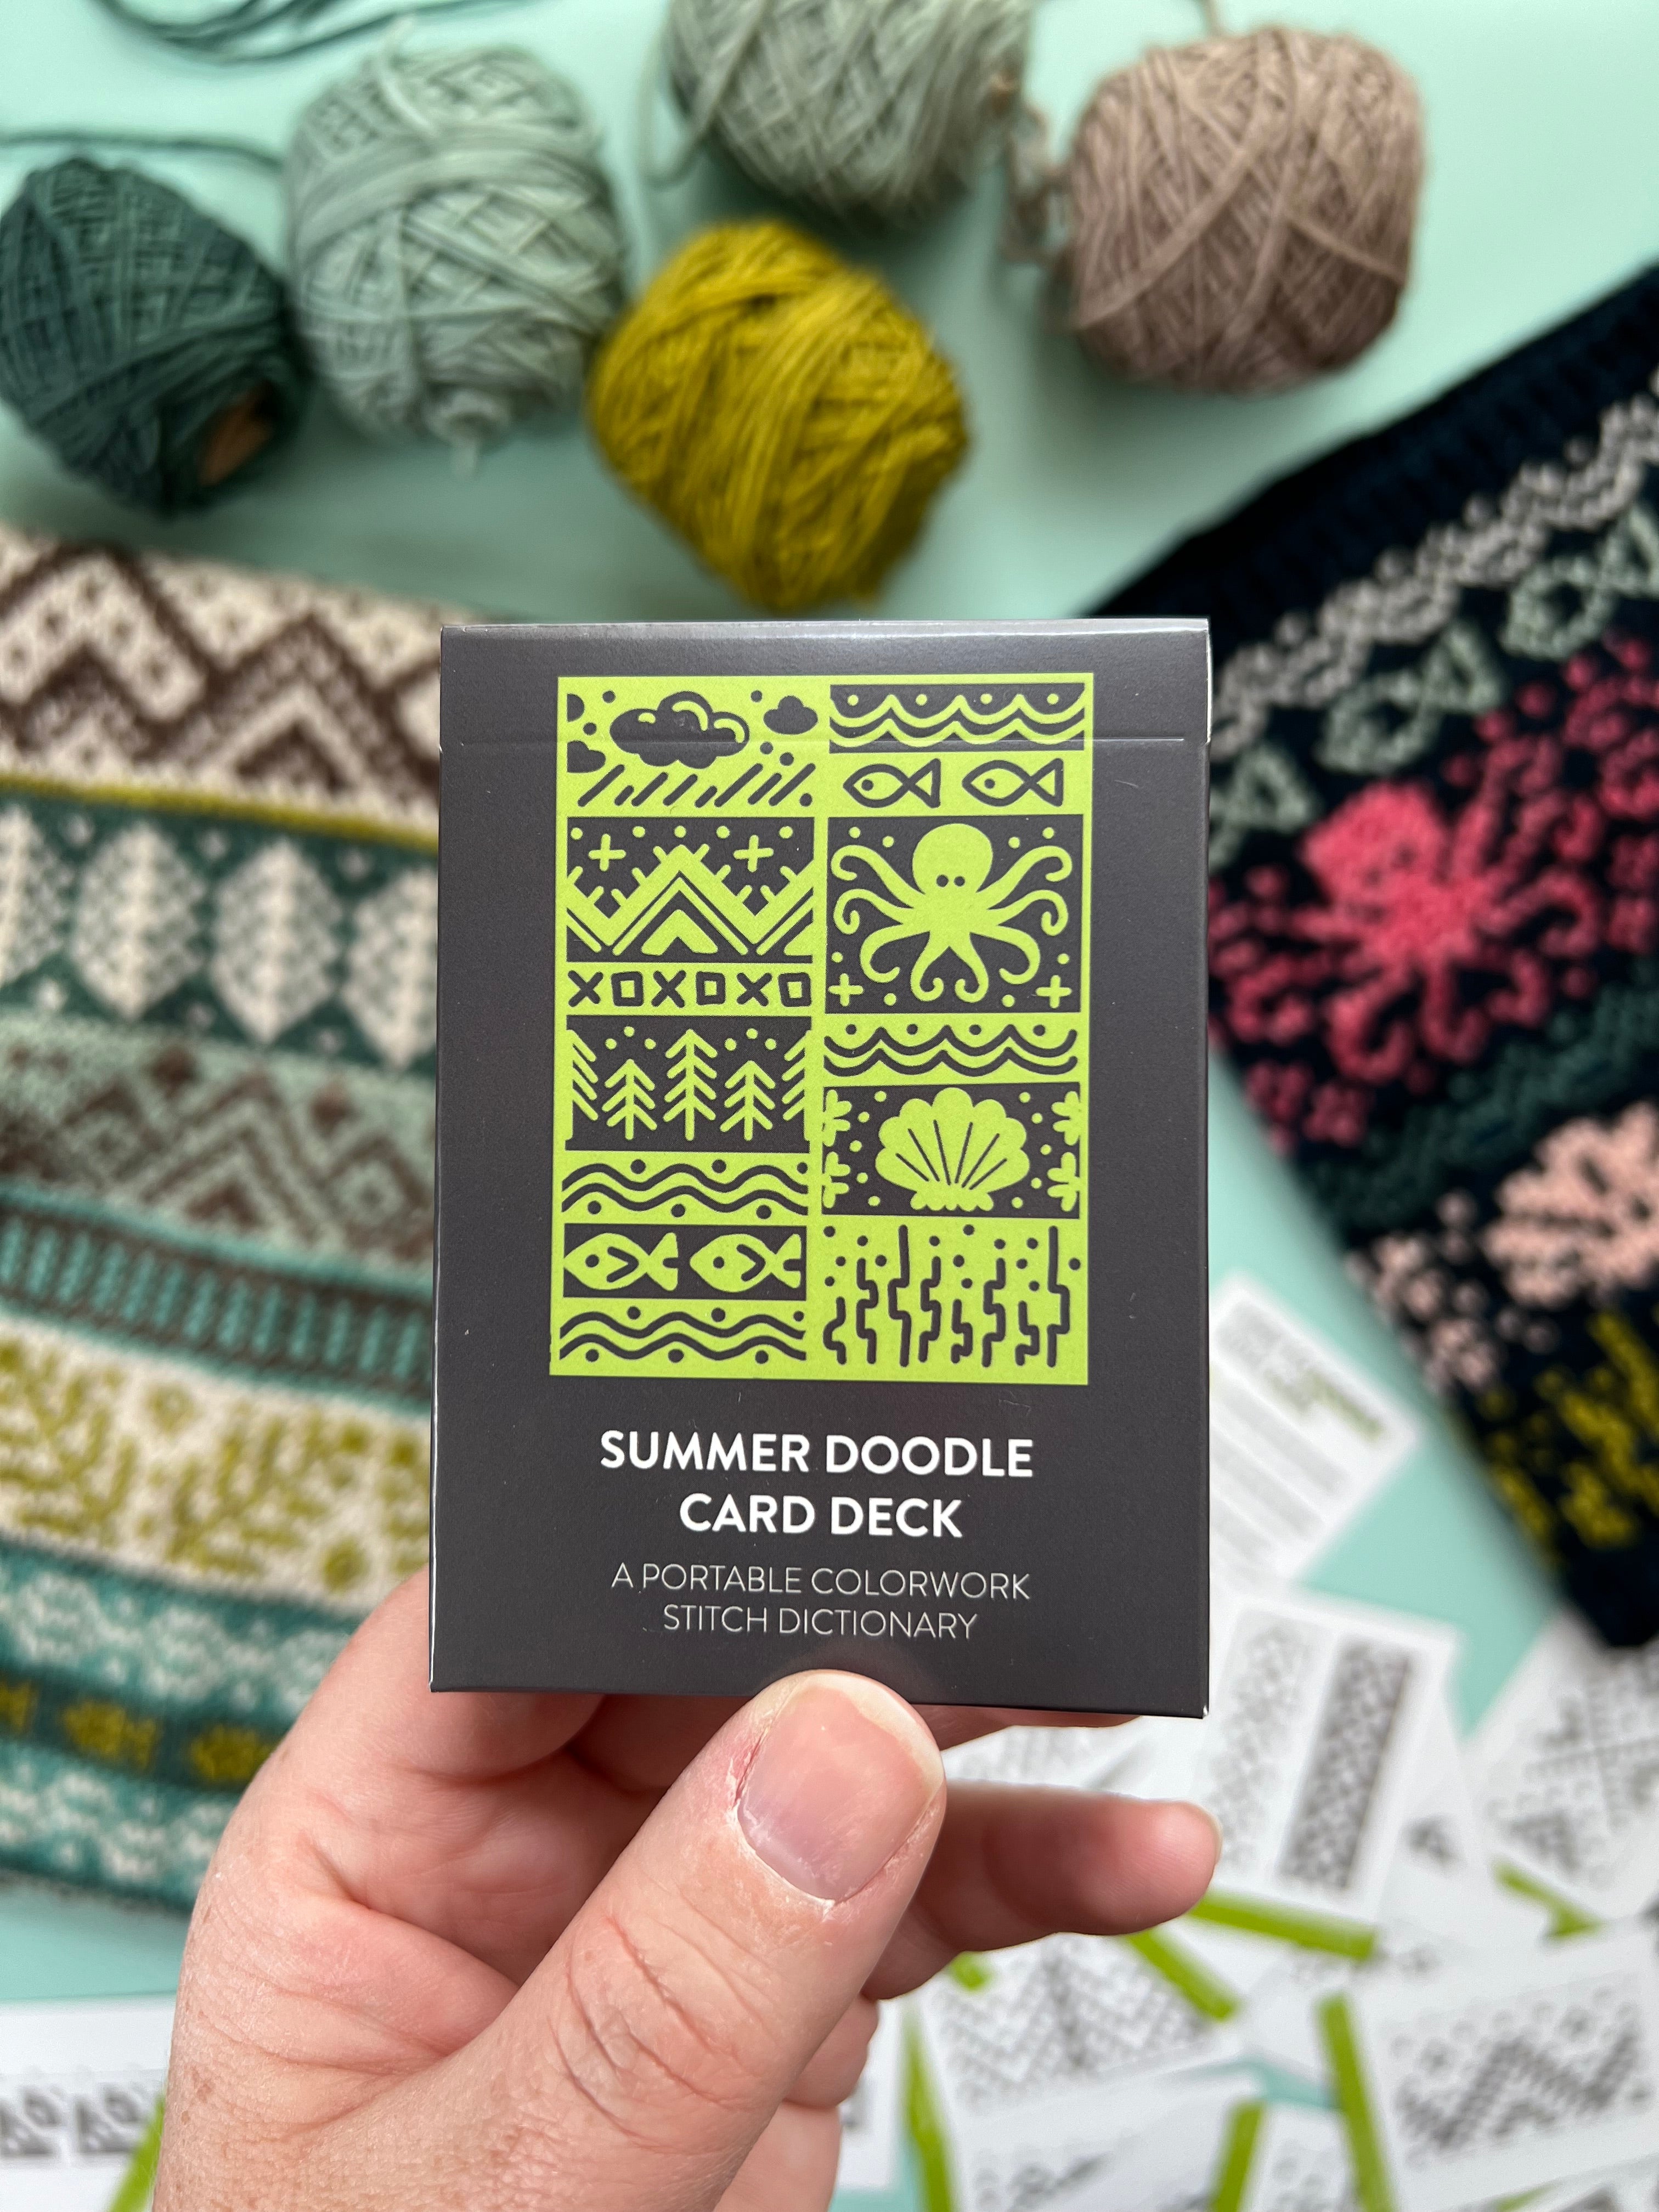 Doodle Deck Summer by Pacific Knit Co